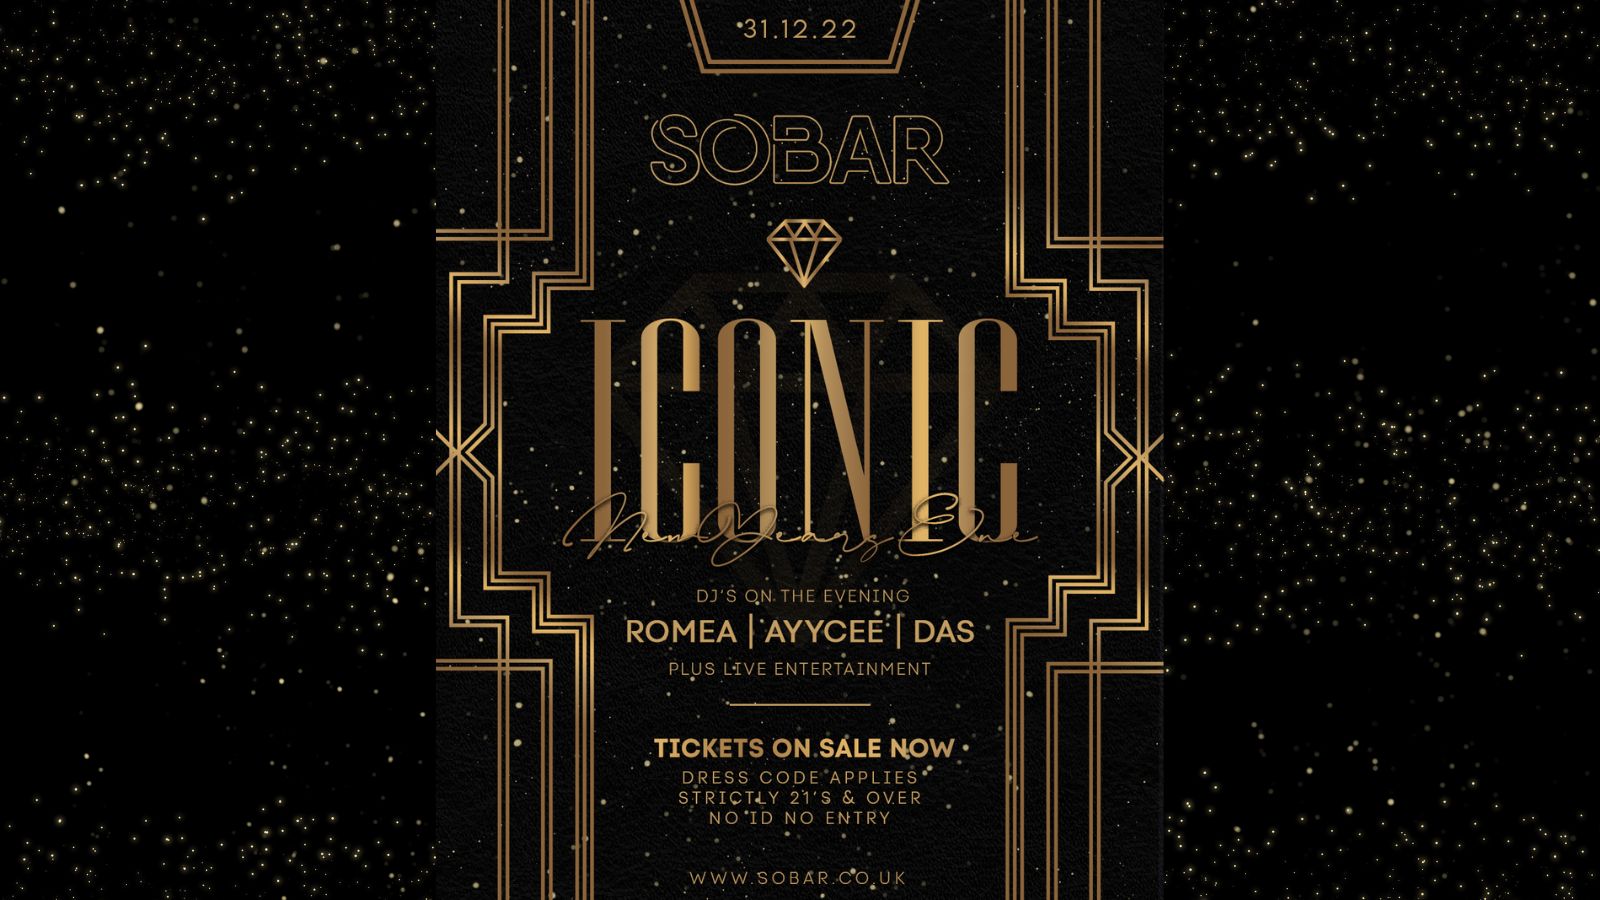 SOBAR Presents “ICONIC” New Years Eve Party 2022